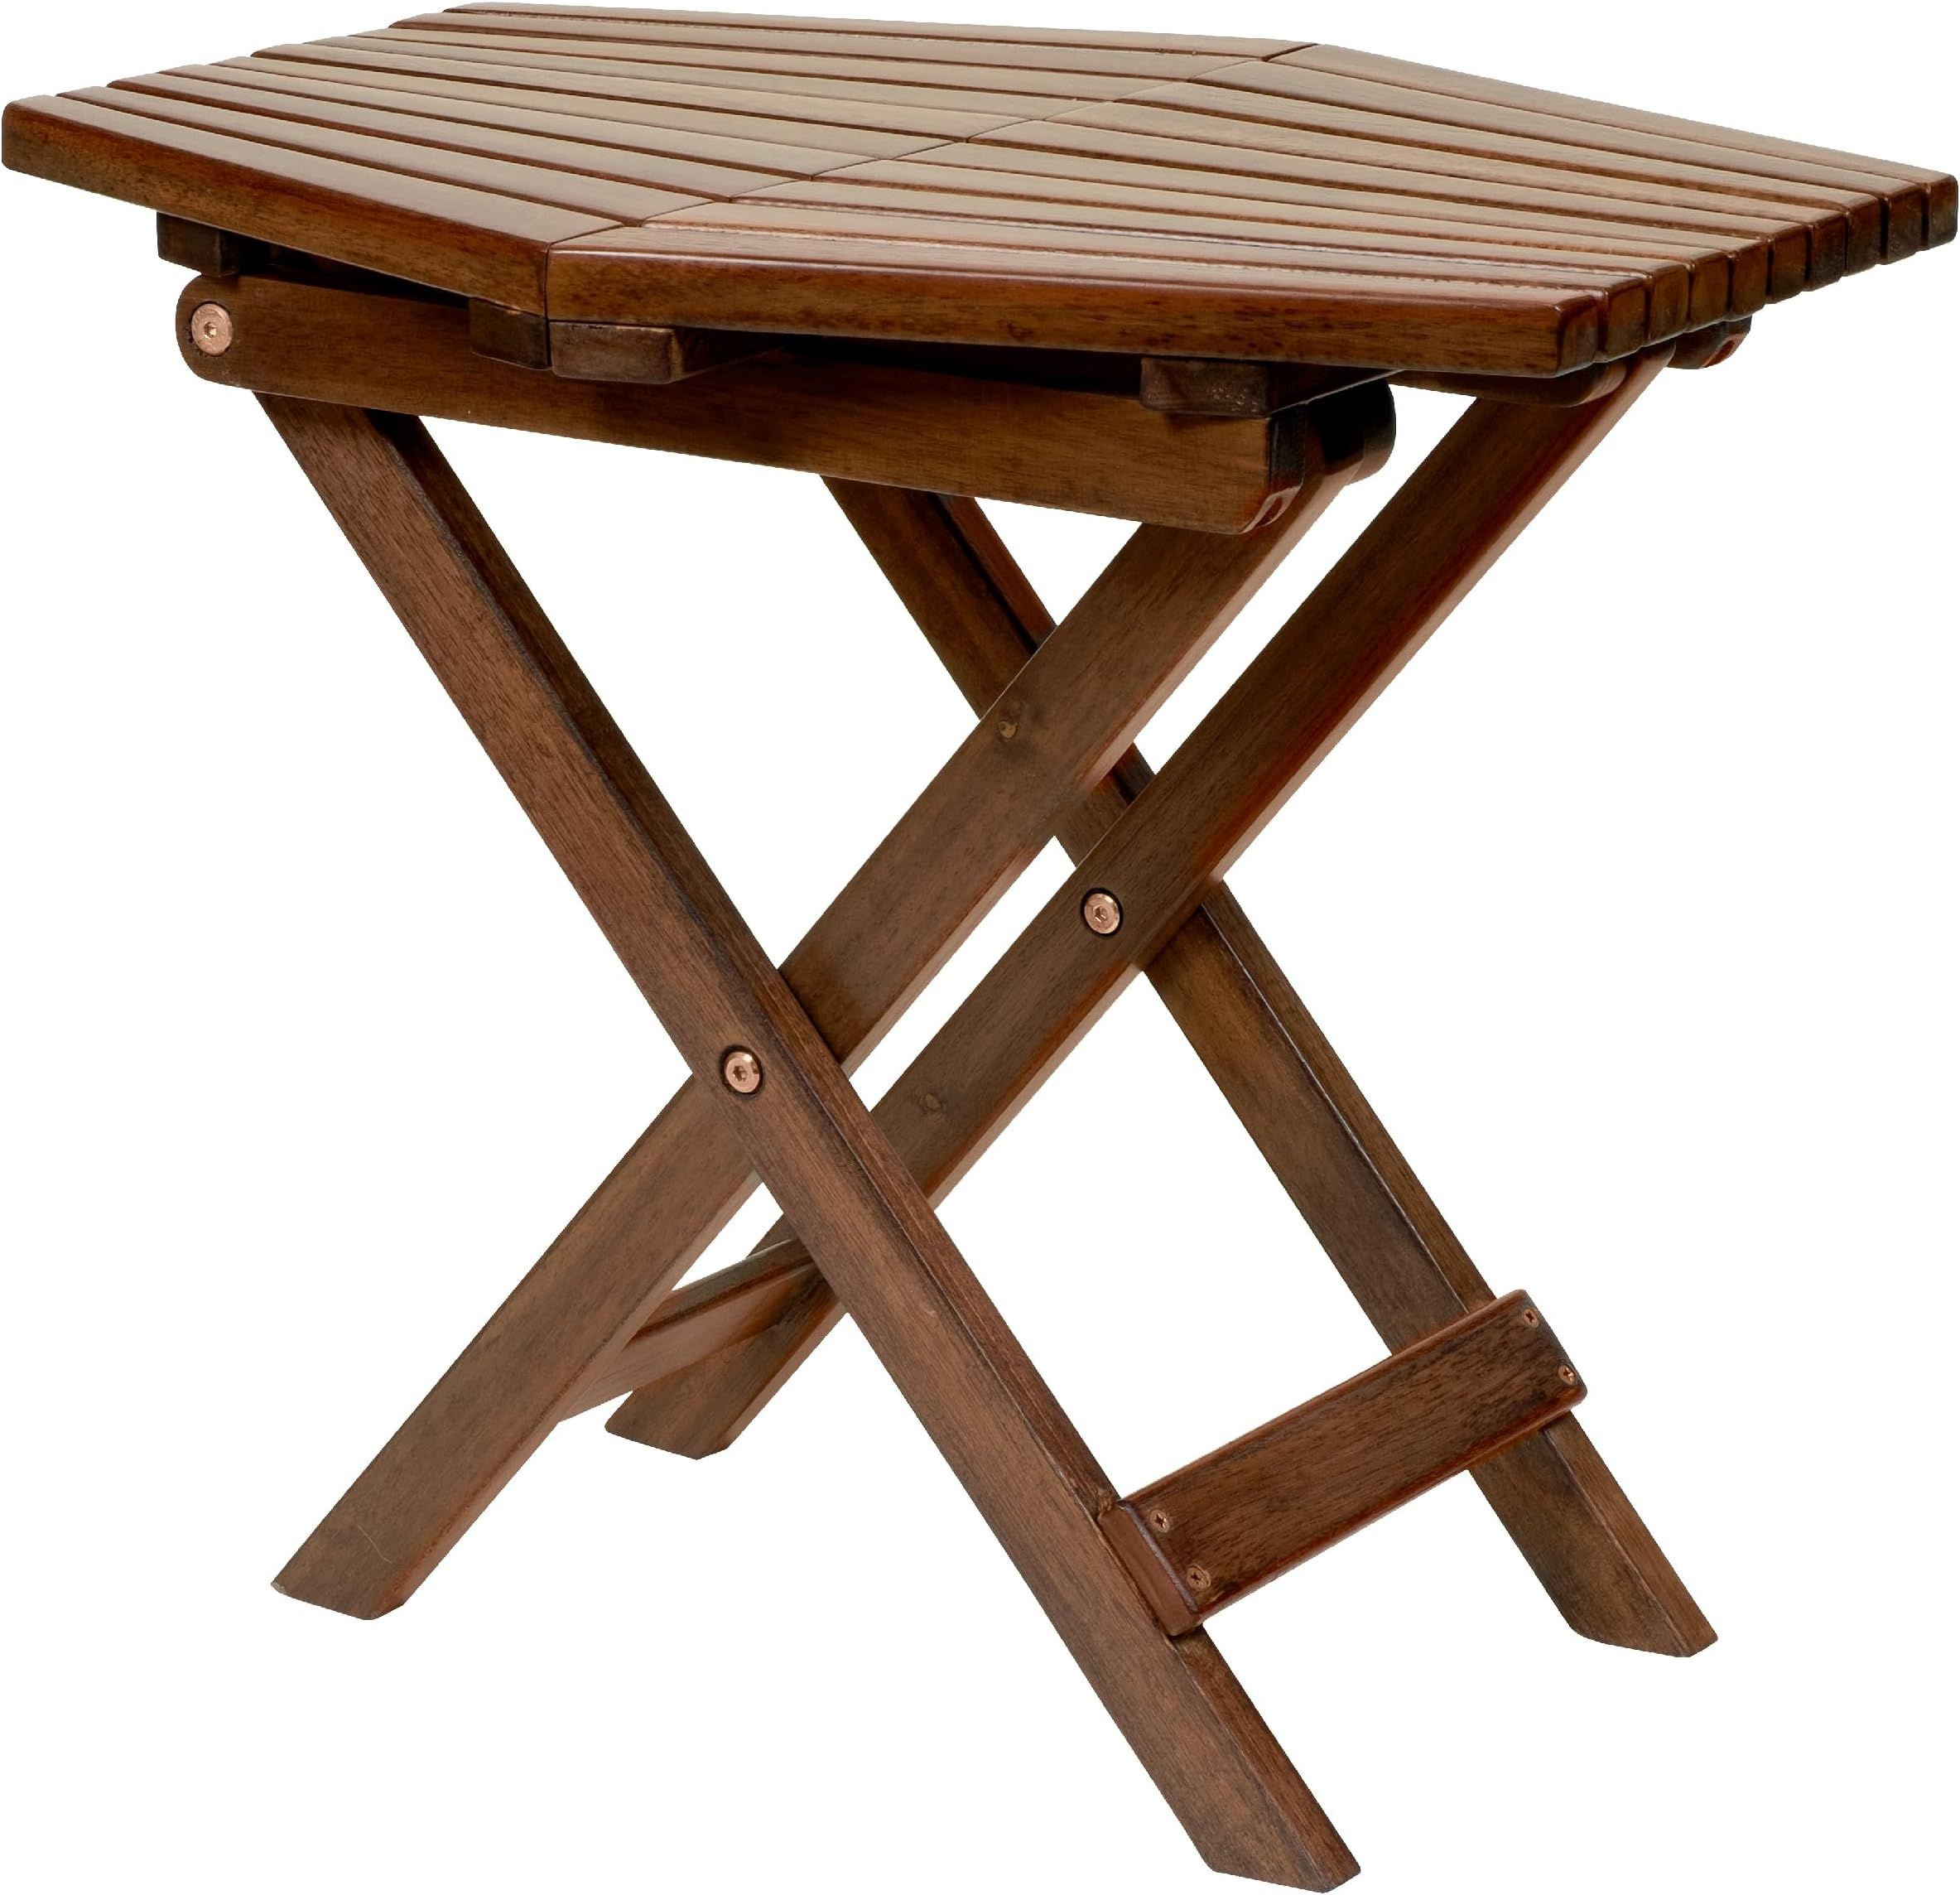 CleverMade Tamarack Folding Table - Outdoor Patio Furniture Accessory for Home Entertaining in the Patio, Backyard, and Deck, Cinnamon, Small | Amazon (US)